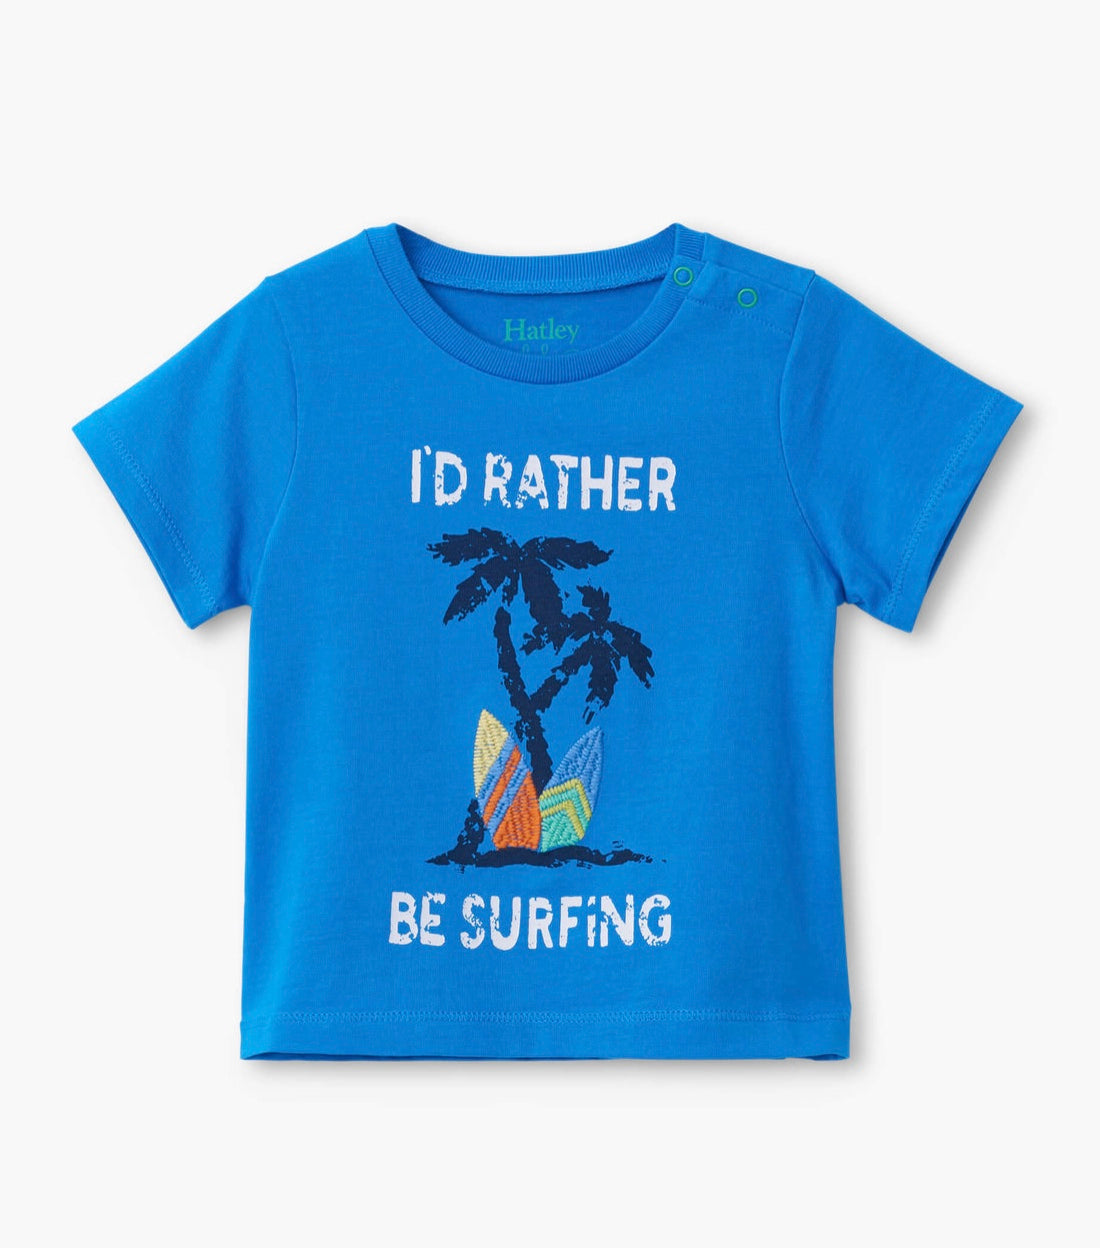 Surfing baby graphic tee